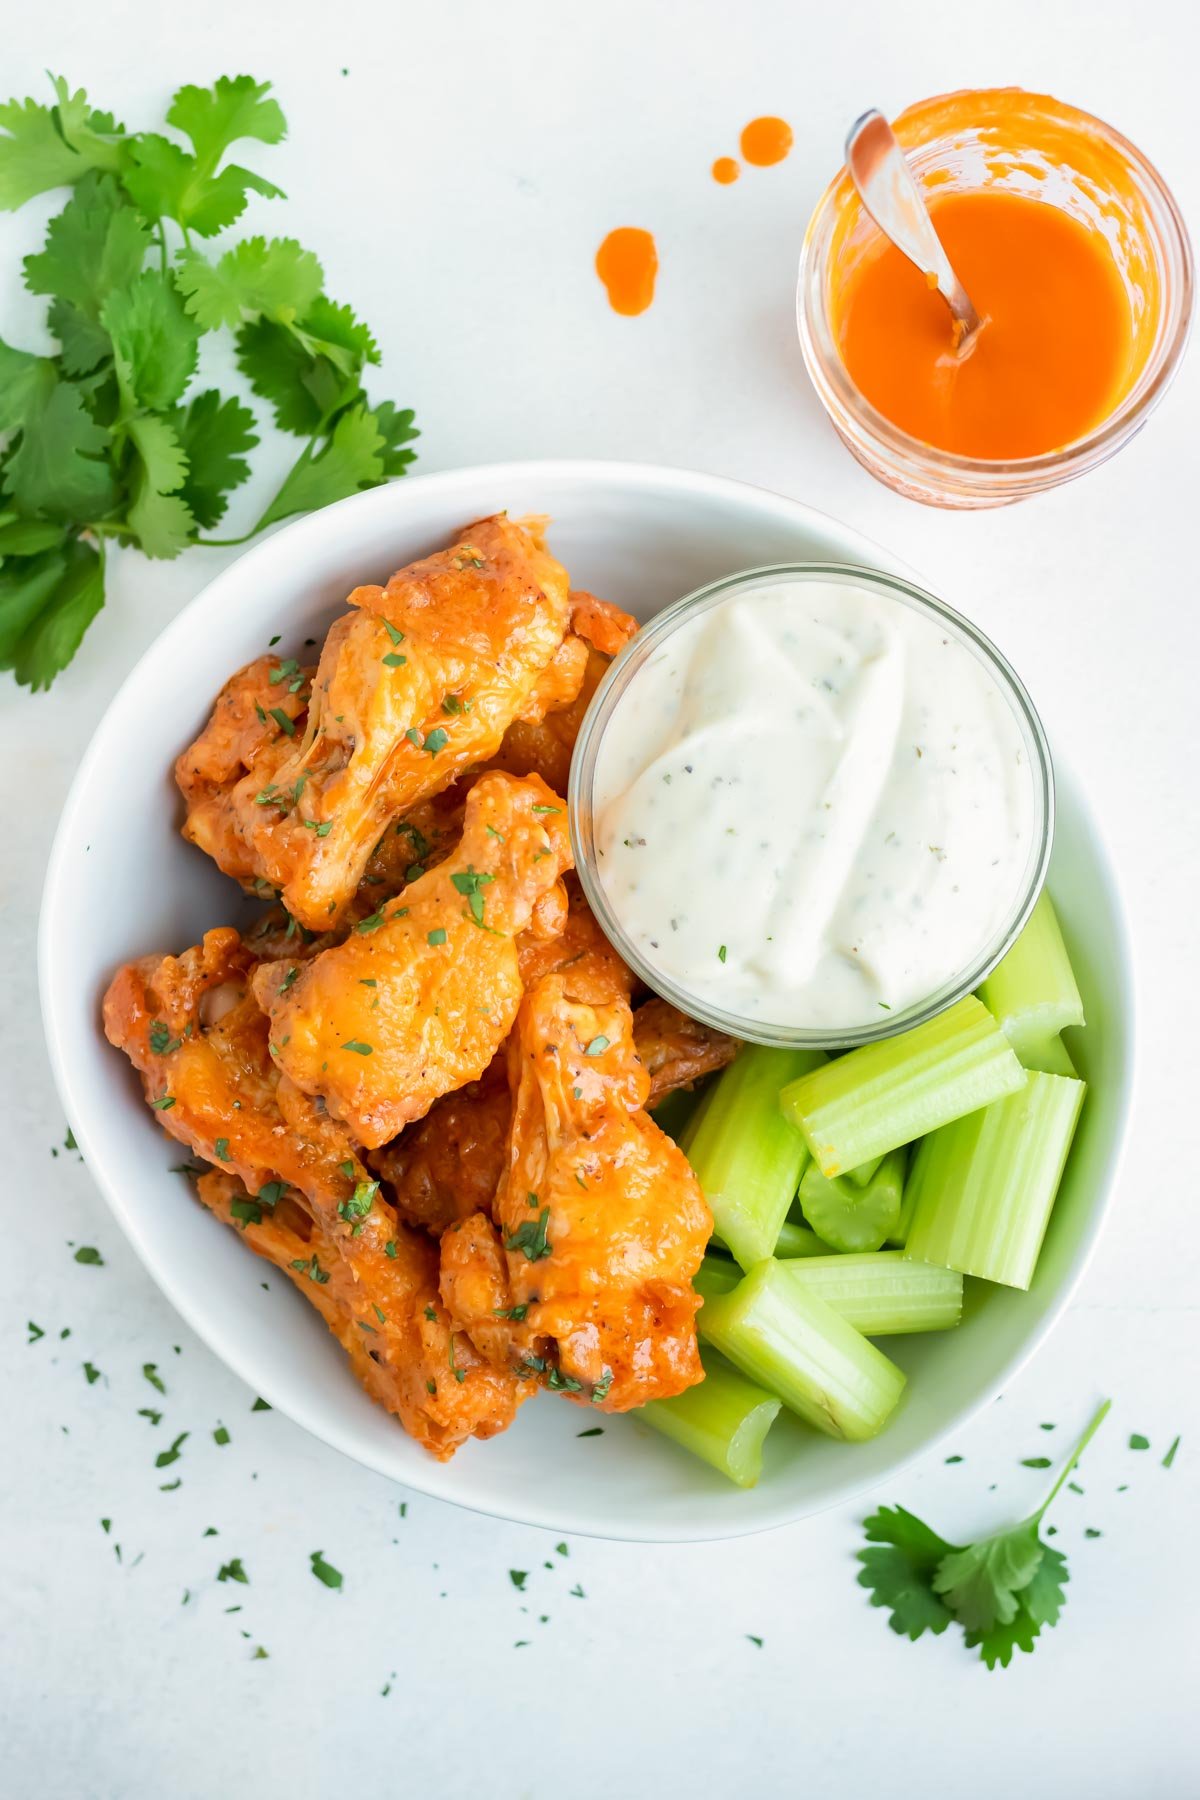 Baked buffalo chicken wings are served with blue cheese dressing and celery.